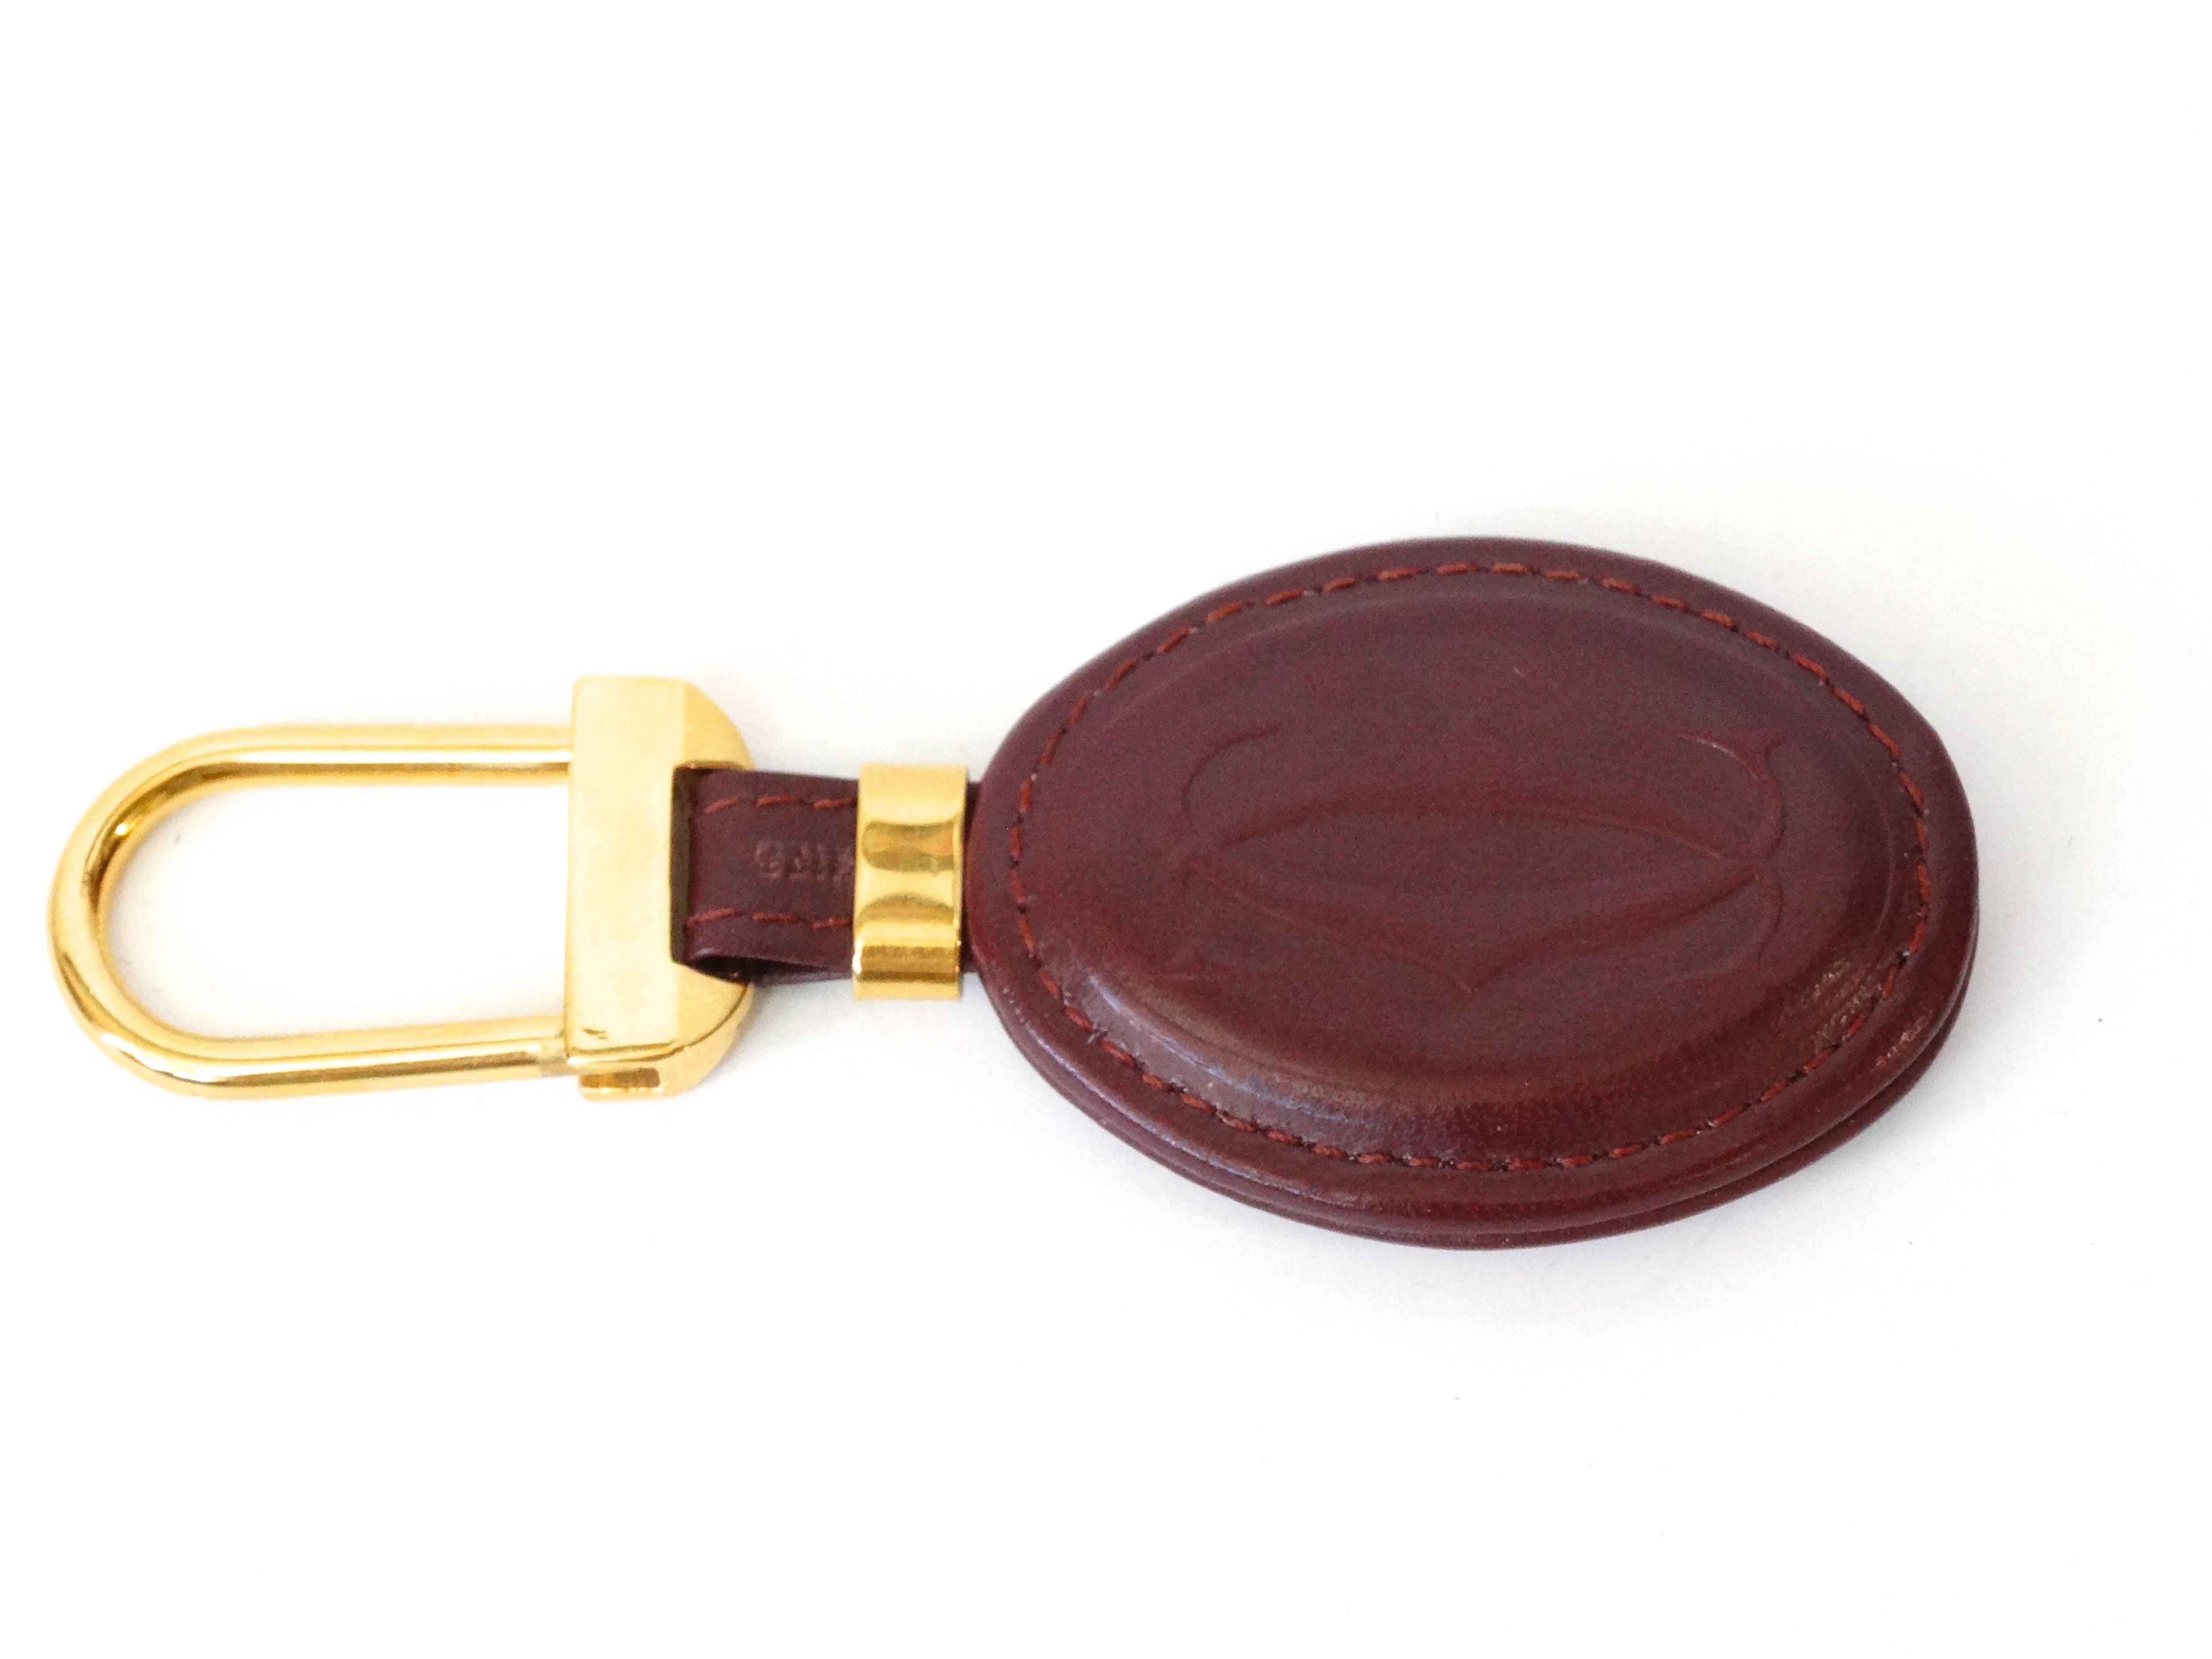 This stylish keychain features an oval pad of burgundy leather embossed with the Cartier logo with a 18kt plated brass ring. This is a marvelous keychain that is as practical as it is chic. Comes with original box

Size: Length: 2